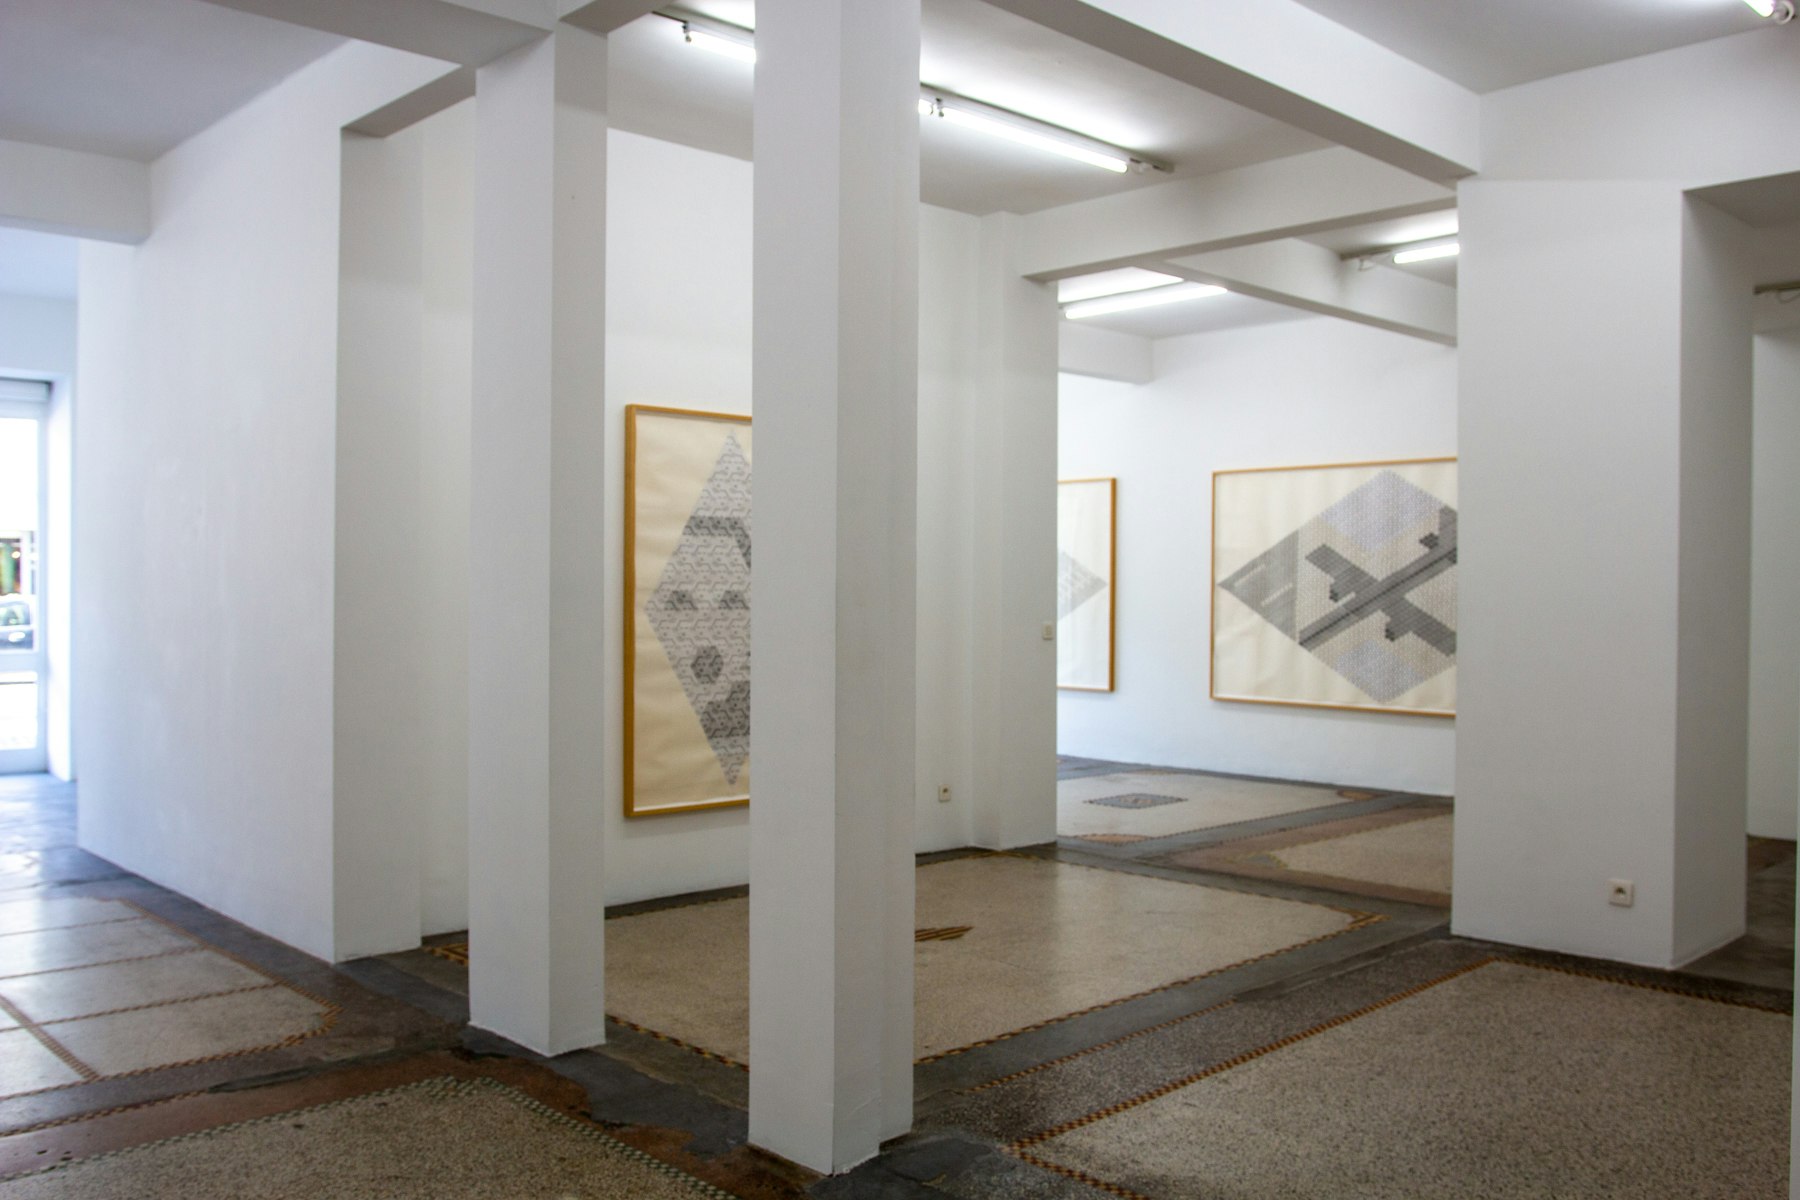 A gallery interior with white walls and columns, and contemporary art on the walls; there is a stone floor with large paving slabs in grey and cream.